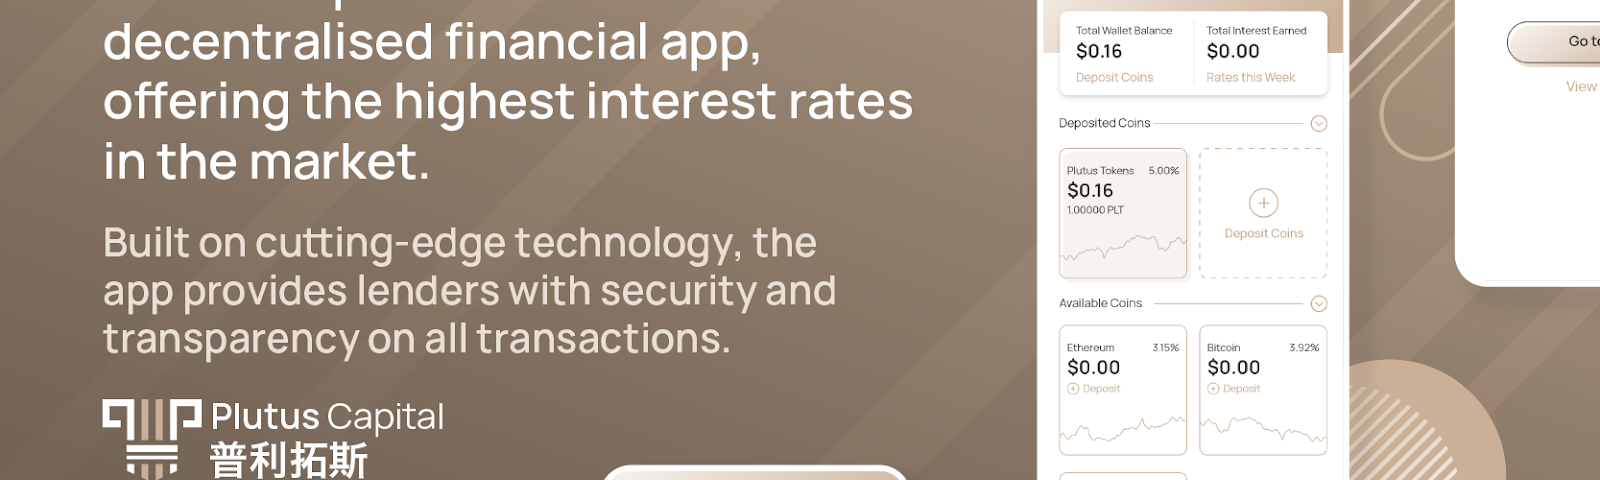 Plutus Capital launches decentralised financial app, offering the highest interest rates in the market.